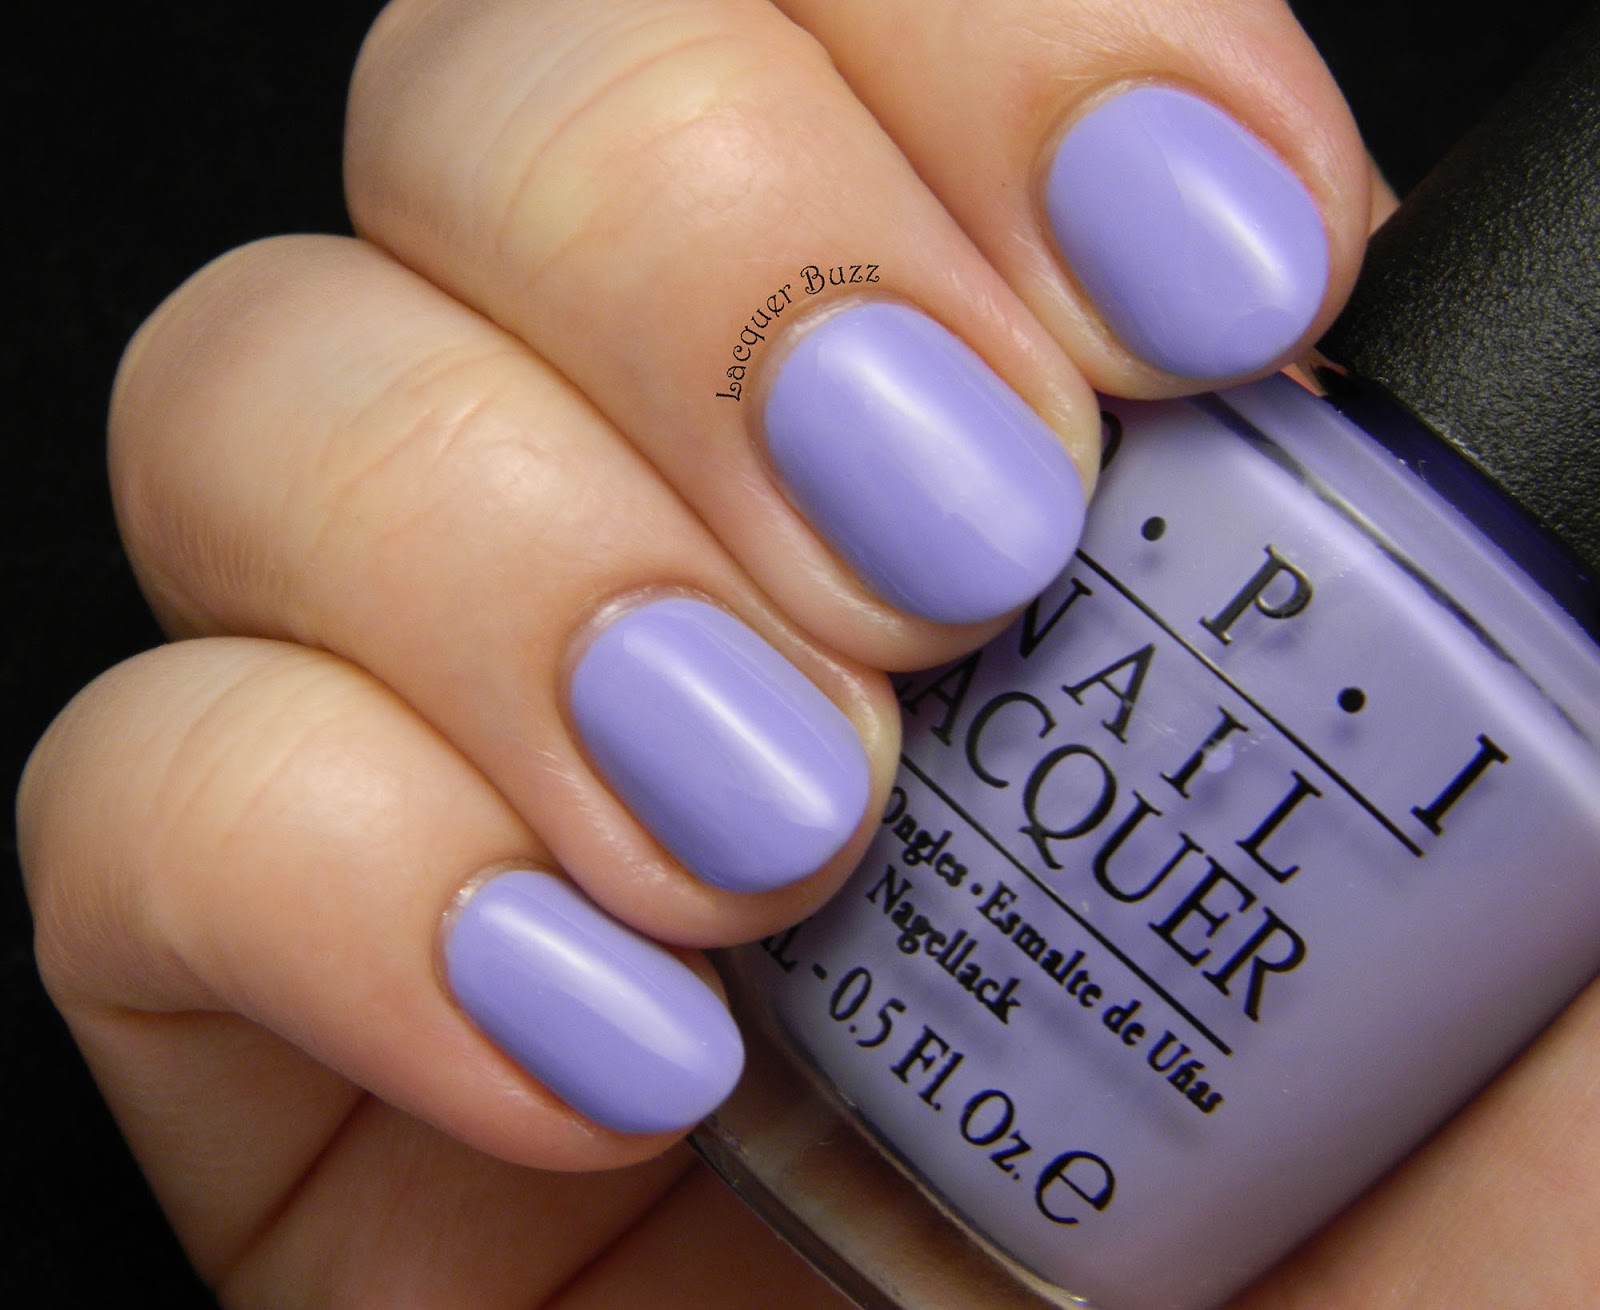 9. OPI Infinite Shine in "You're Such a Budapest" - wide 1